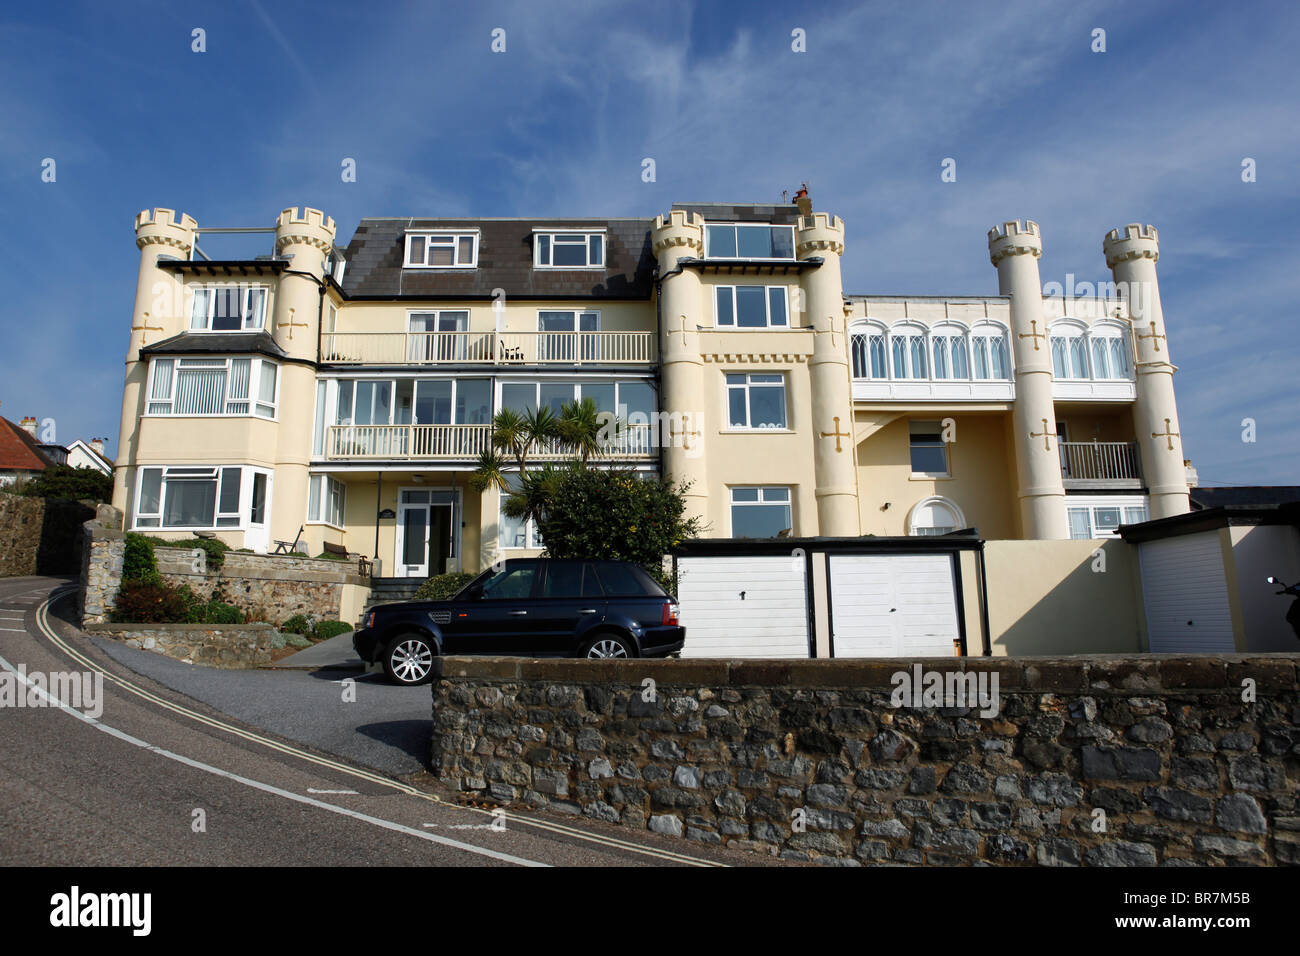 Eclectic architecture in Seaton Stock Photo